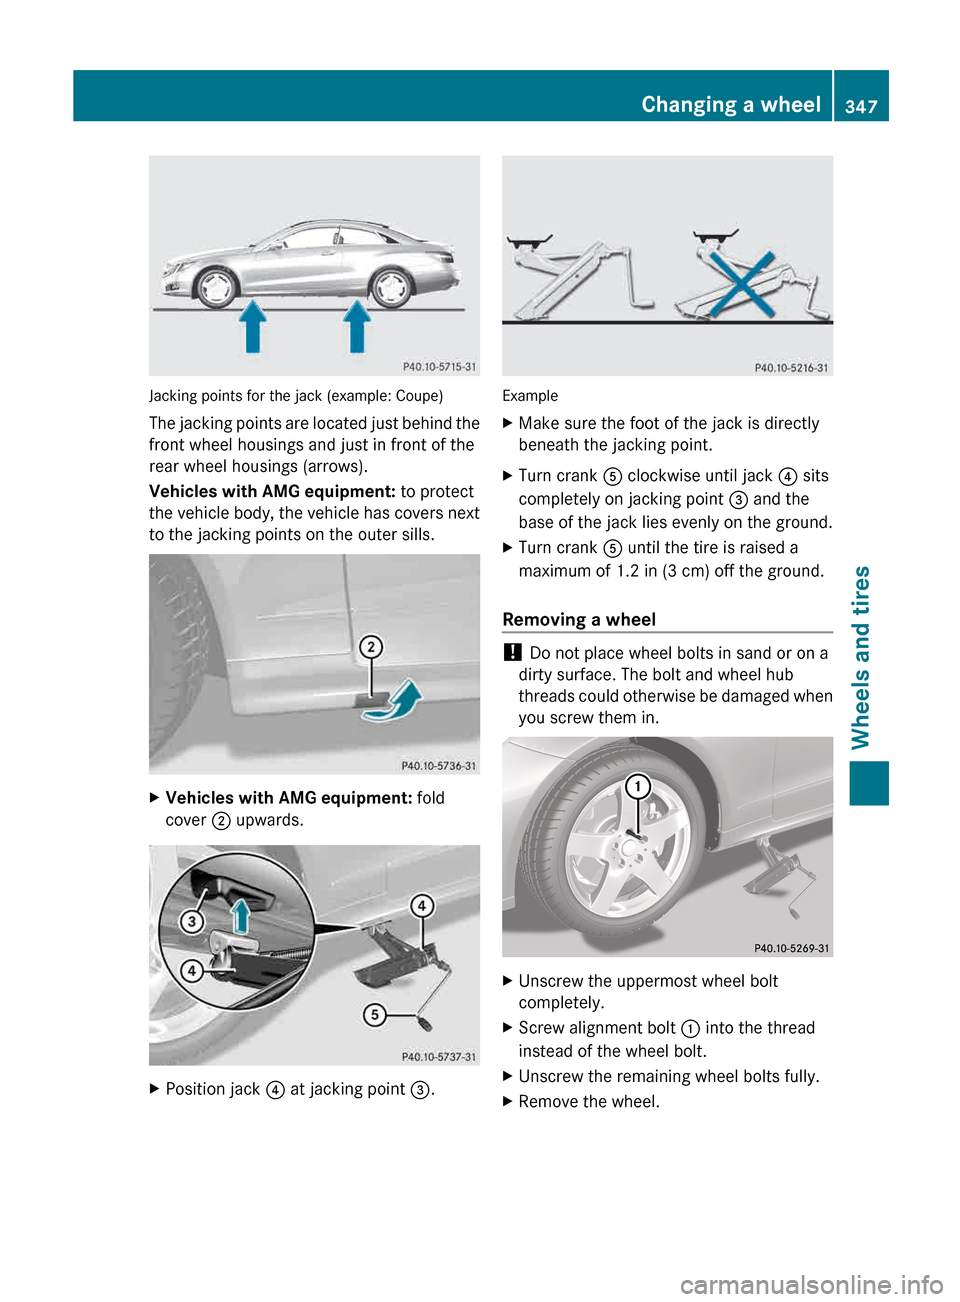 MERCEDES-BENZ E-Class CABRIOLET 2013 C207 Service Manual Jacking points for the jack (example: Coupe)
The 
jacking points are located just behind the
front wheel housings and just in front of the
rear wheel housings (arrows).
Vehicles with AMG equipment: to